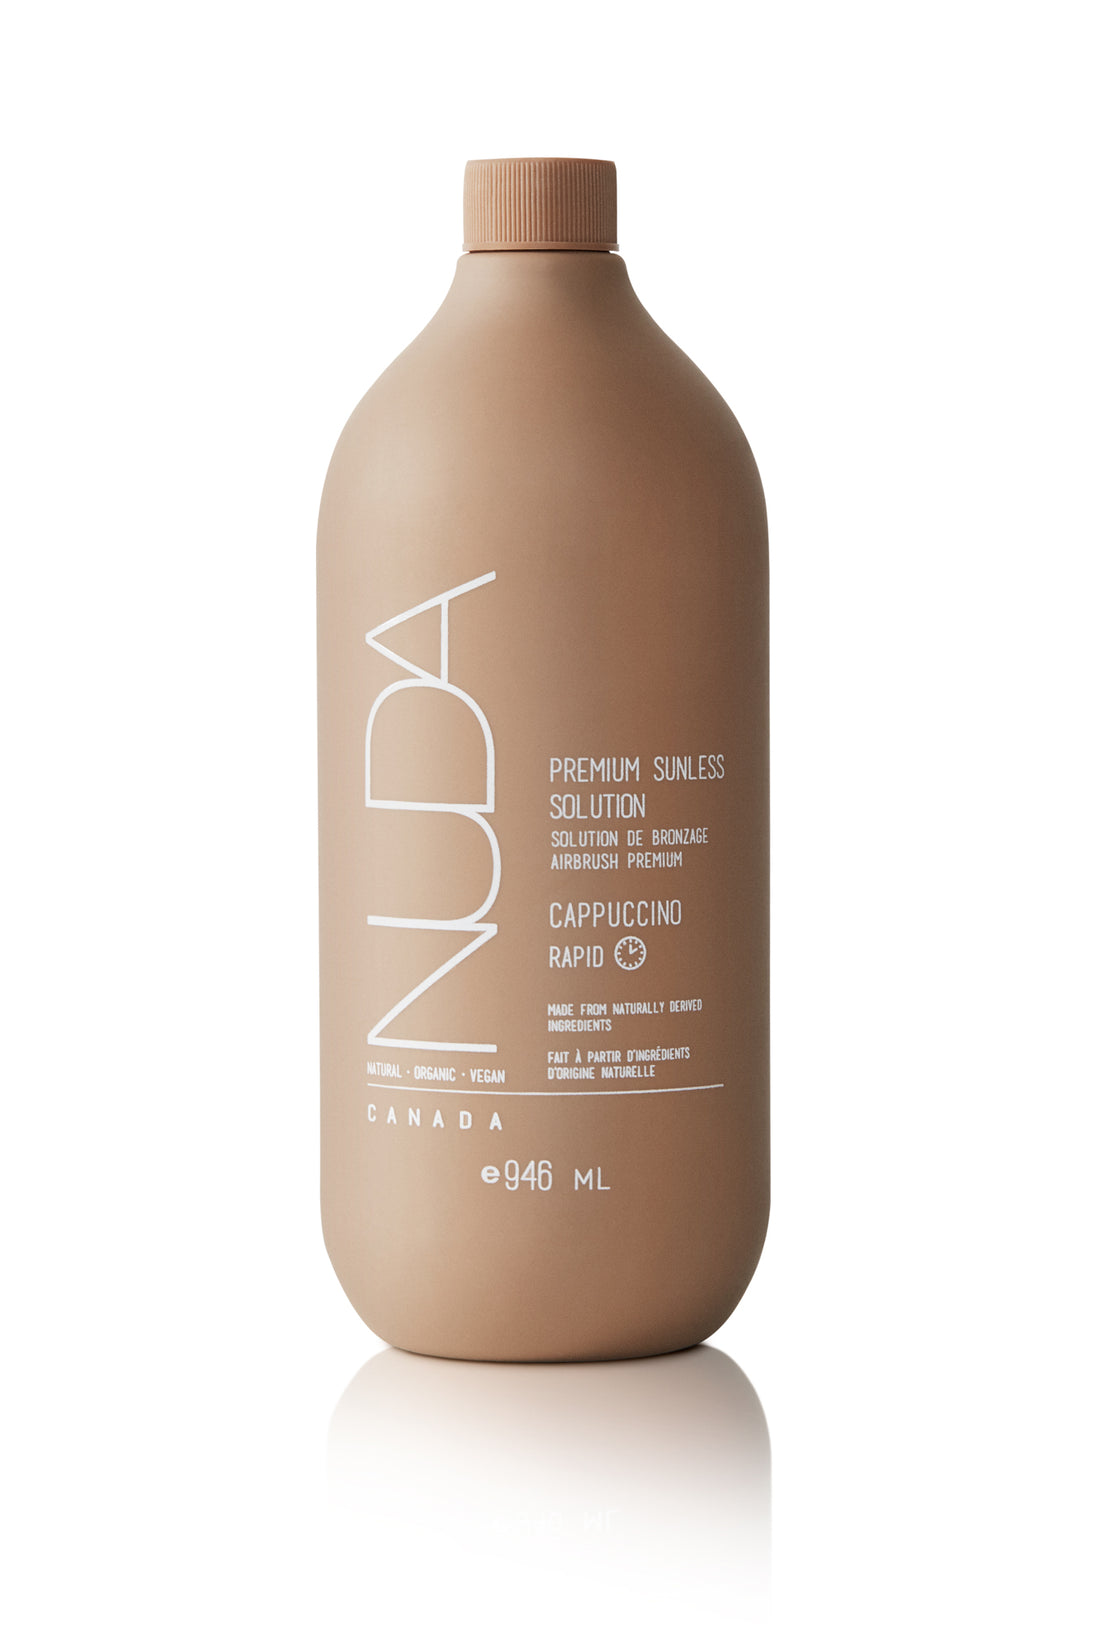 Edgemont A matte brown bottle of nuda sunless tanning solution labeled "premium sunless solution cappuccino" with text indicating it is a vegan product, also noting it is made in canada and contains 946 ml. North Vancouver